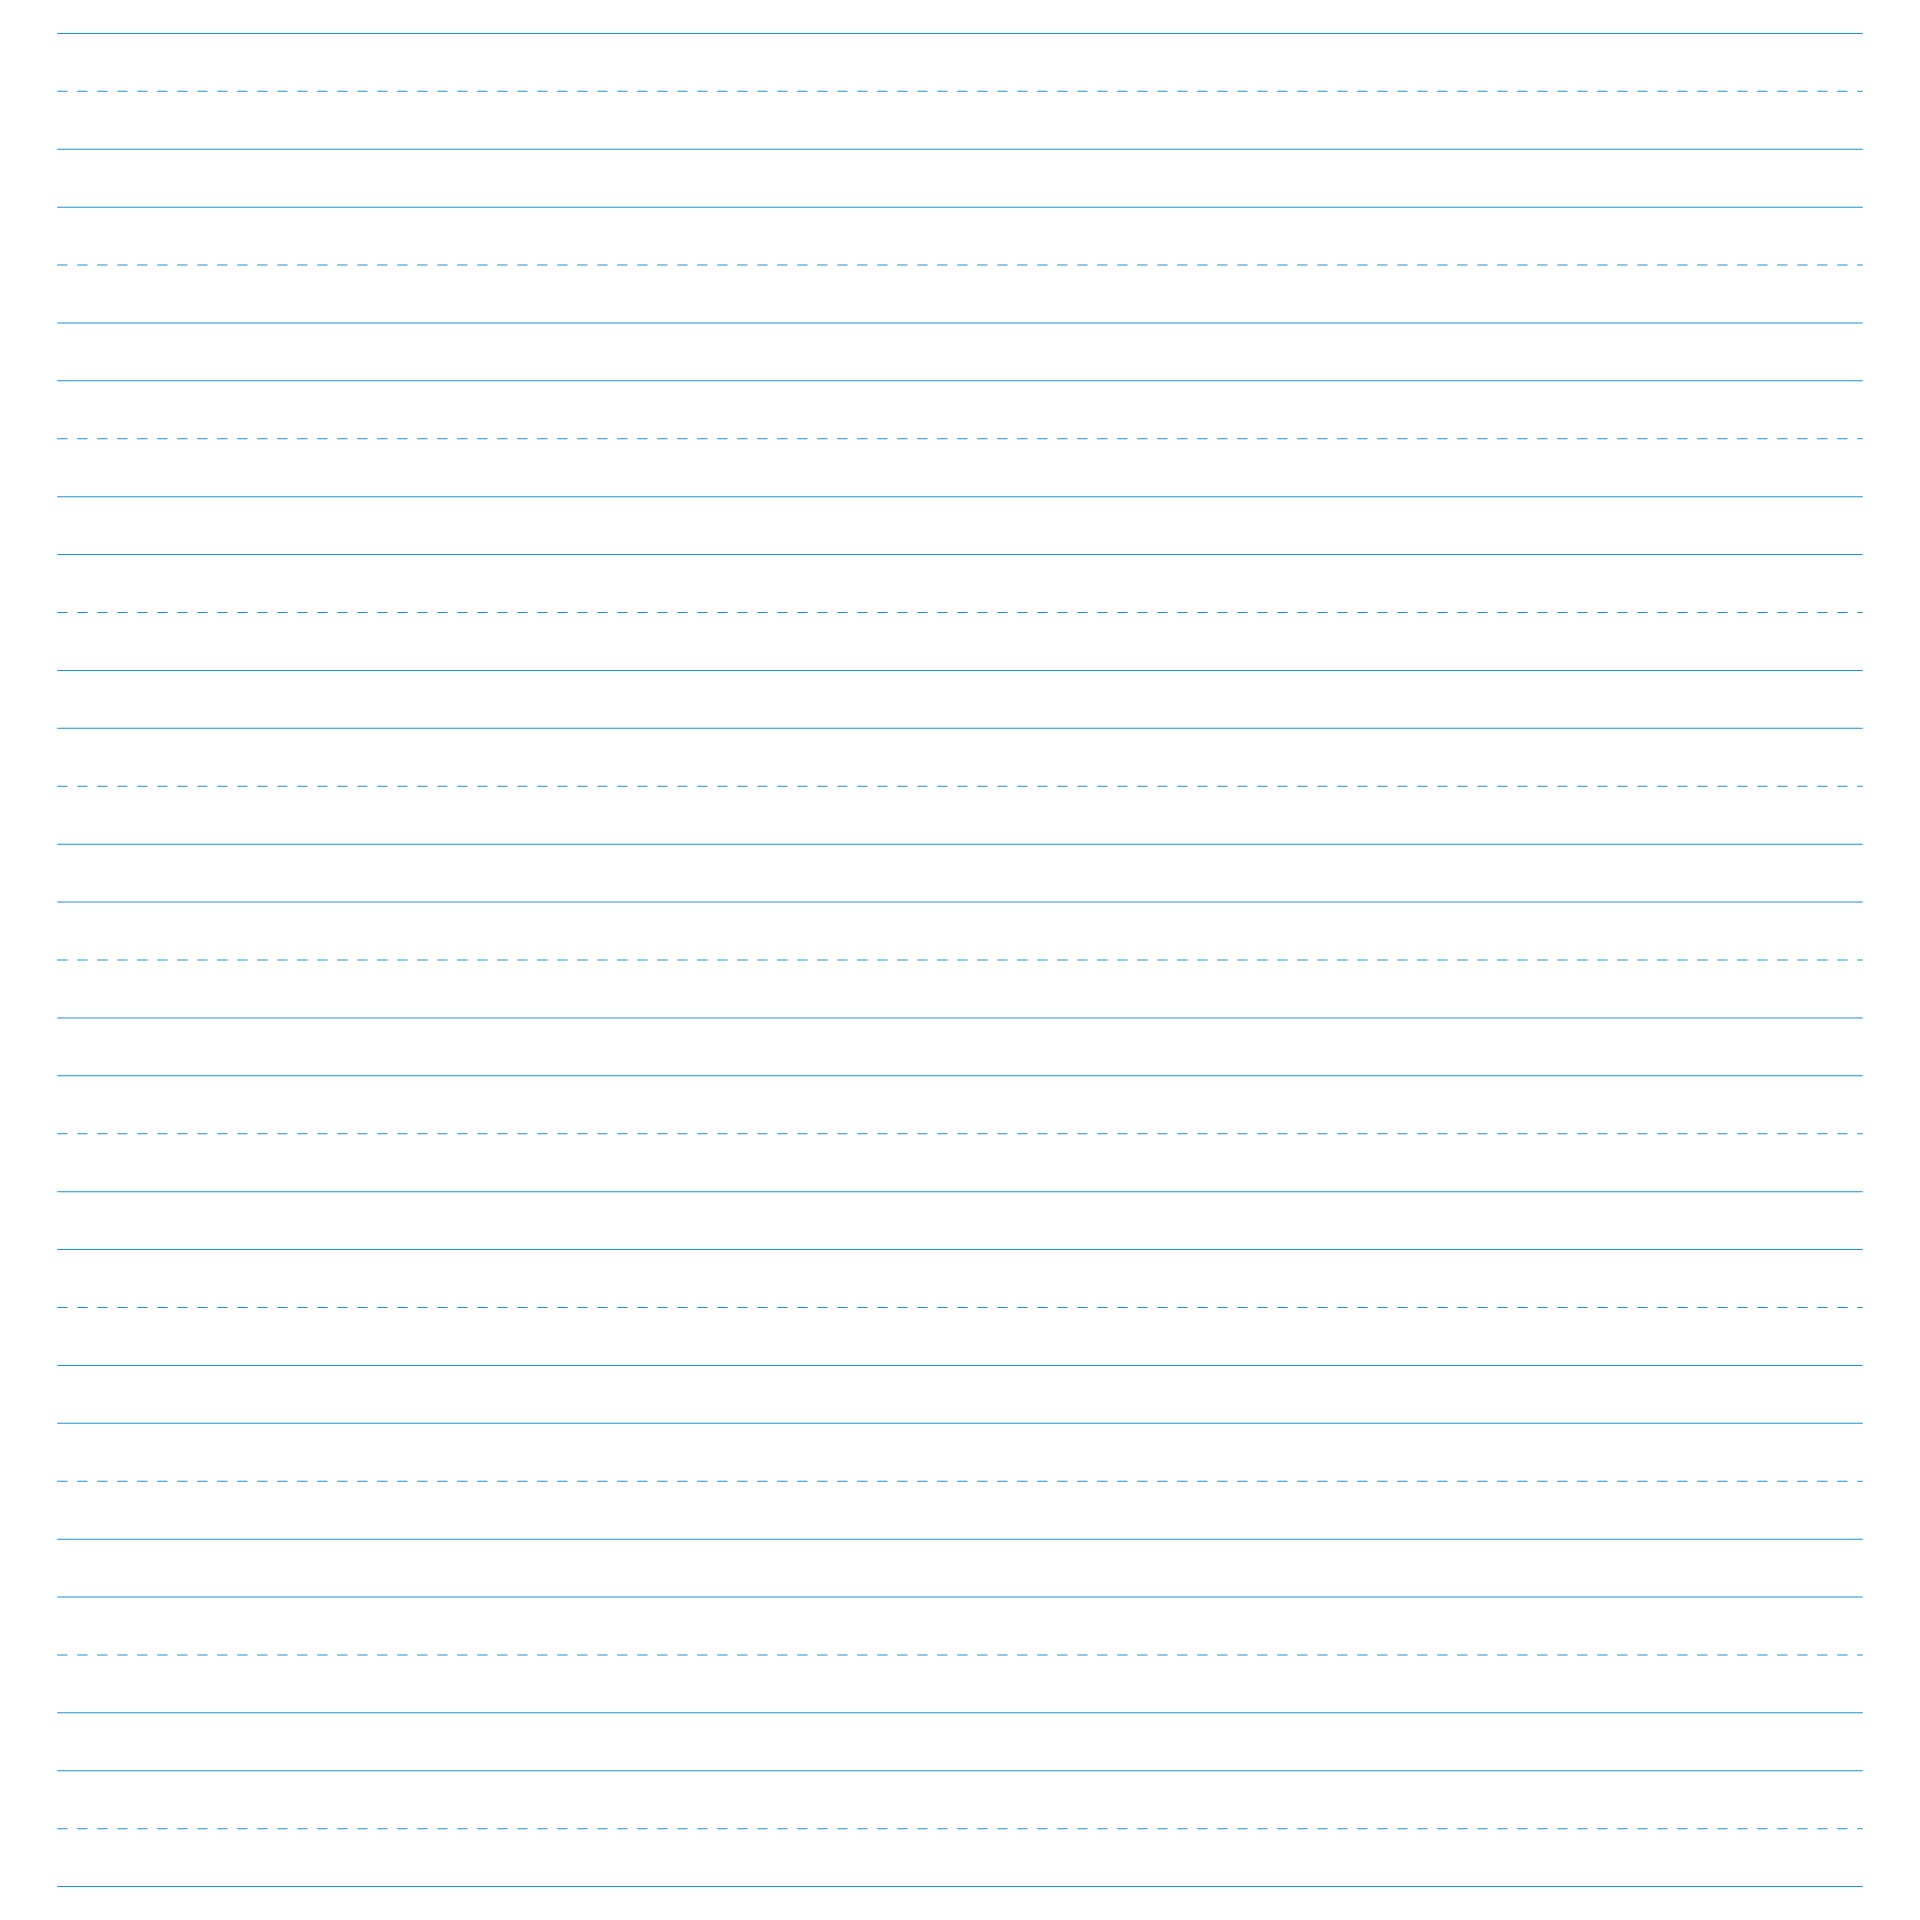 5 Best Images of Printable Blank Writing Pages Free